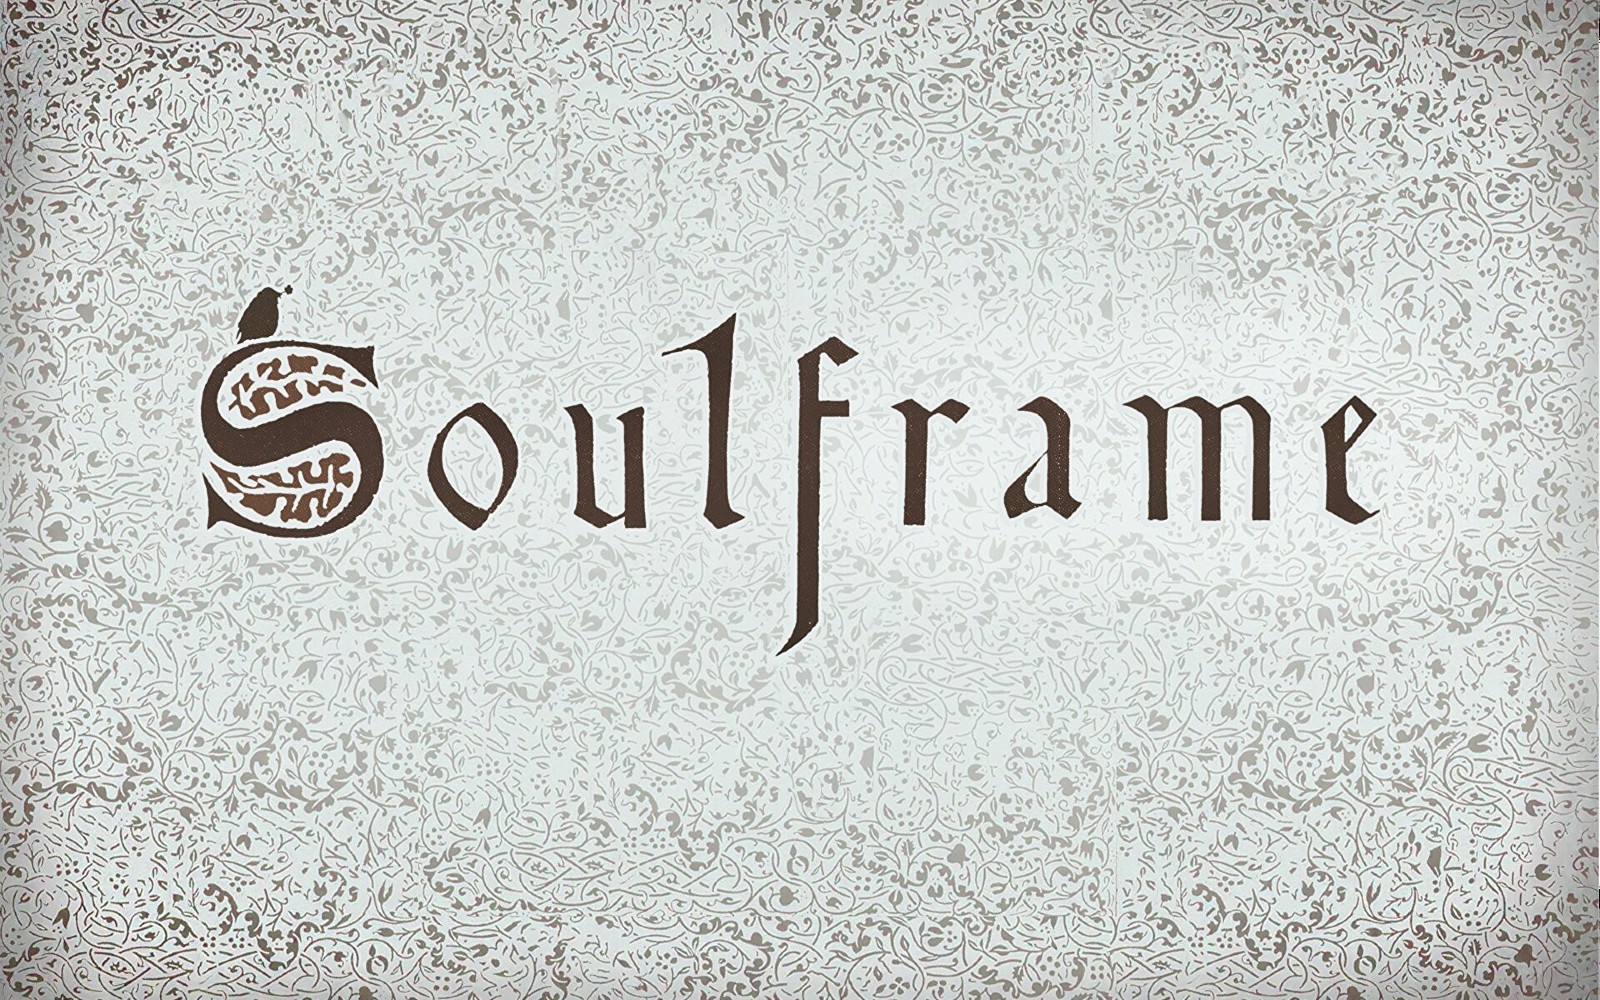 ‘Soulframe’ is a free-to-play MMO from the studio behind ‘Warframe’